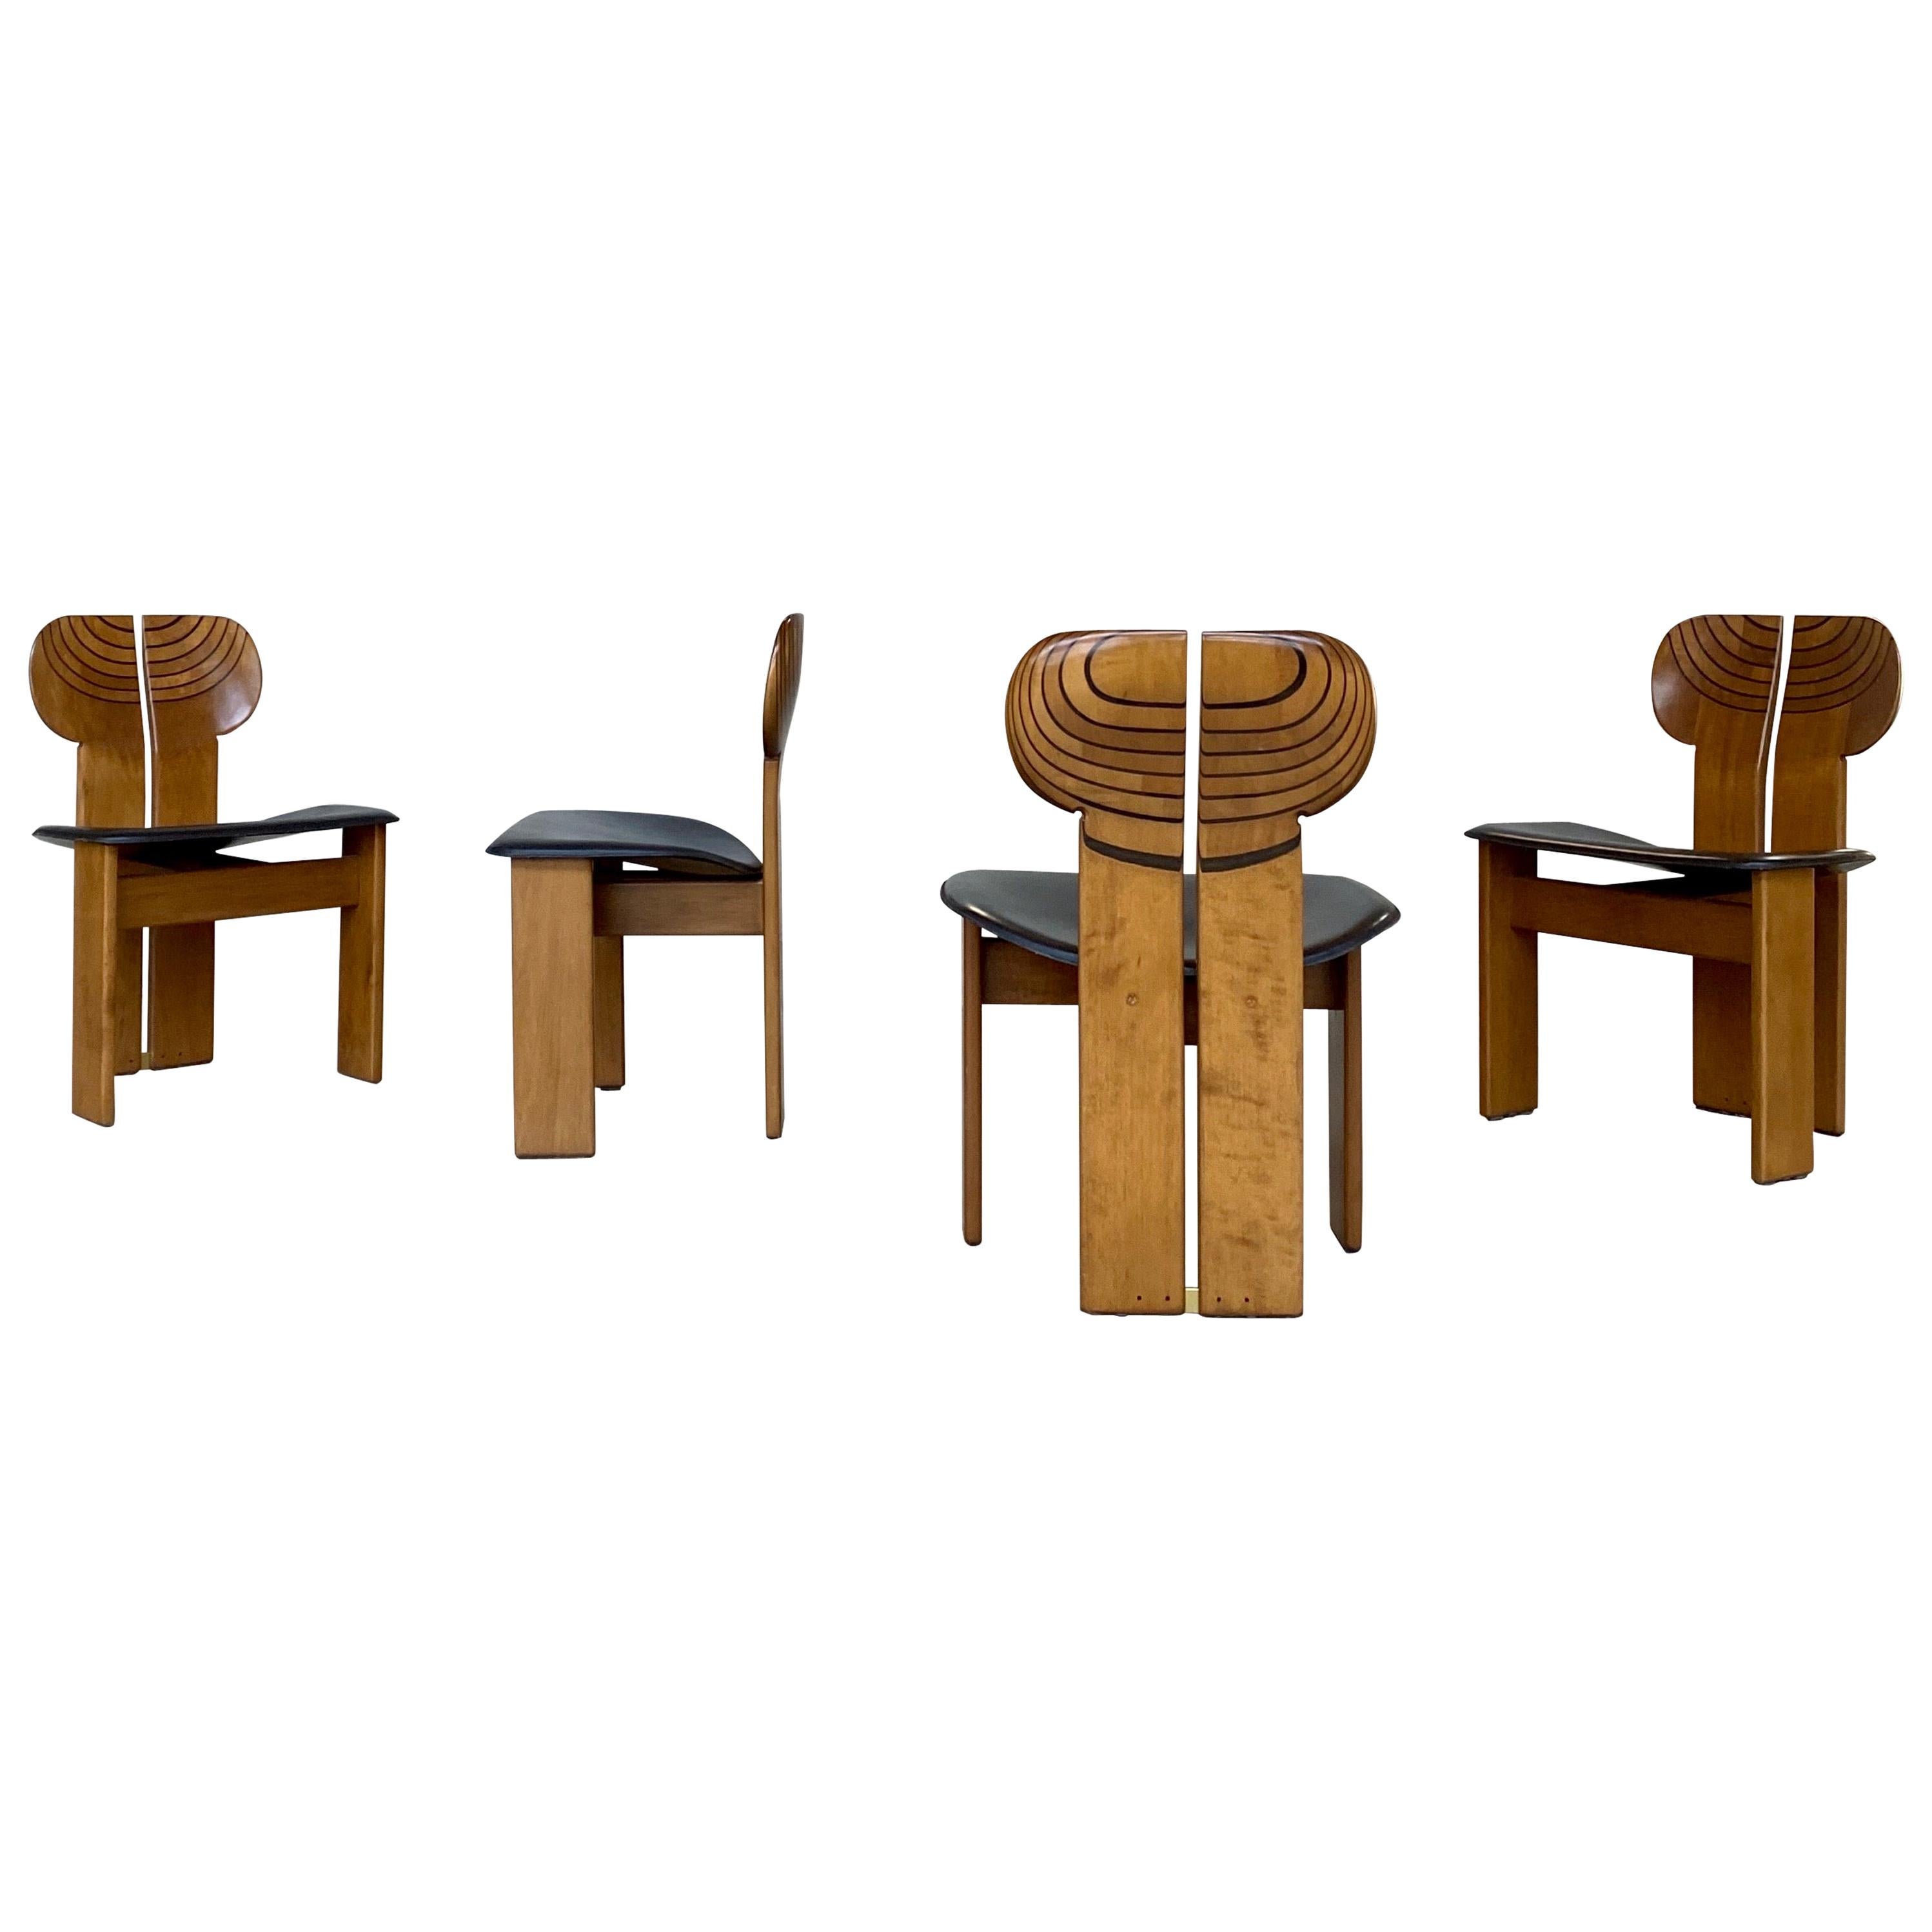 Afra & Tobia Scarpa "Africa" Dining Chairs for Maxalto, 1975